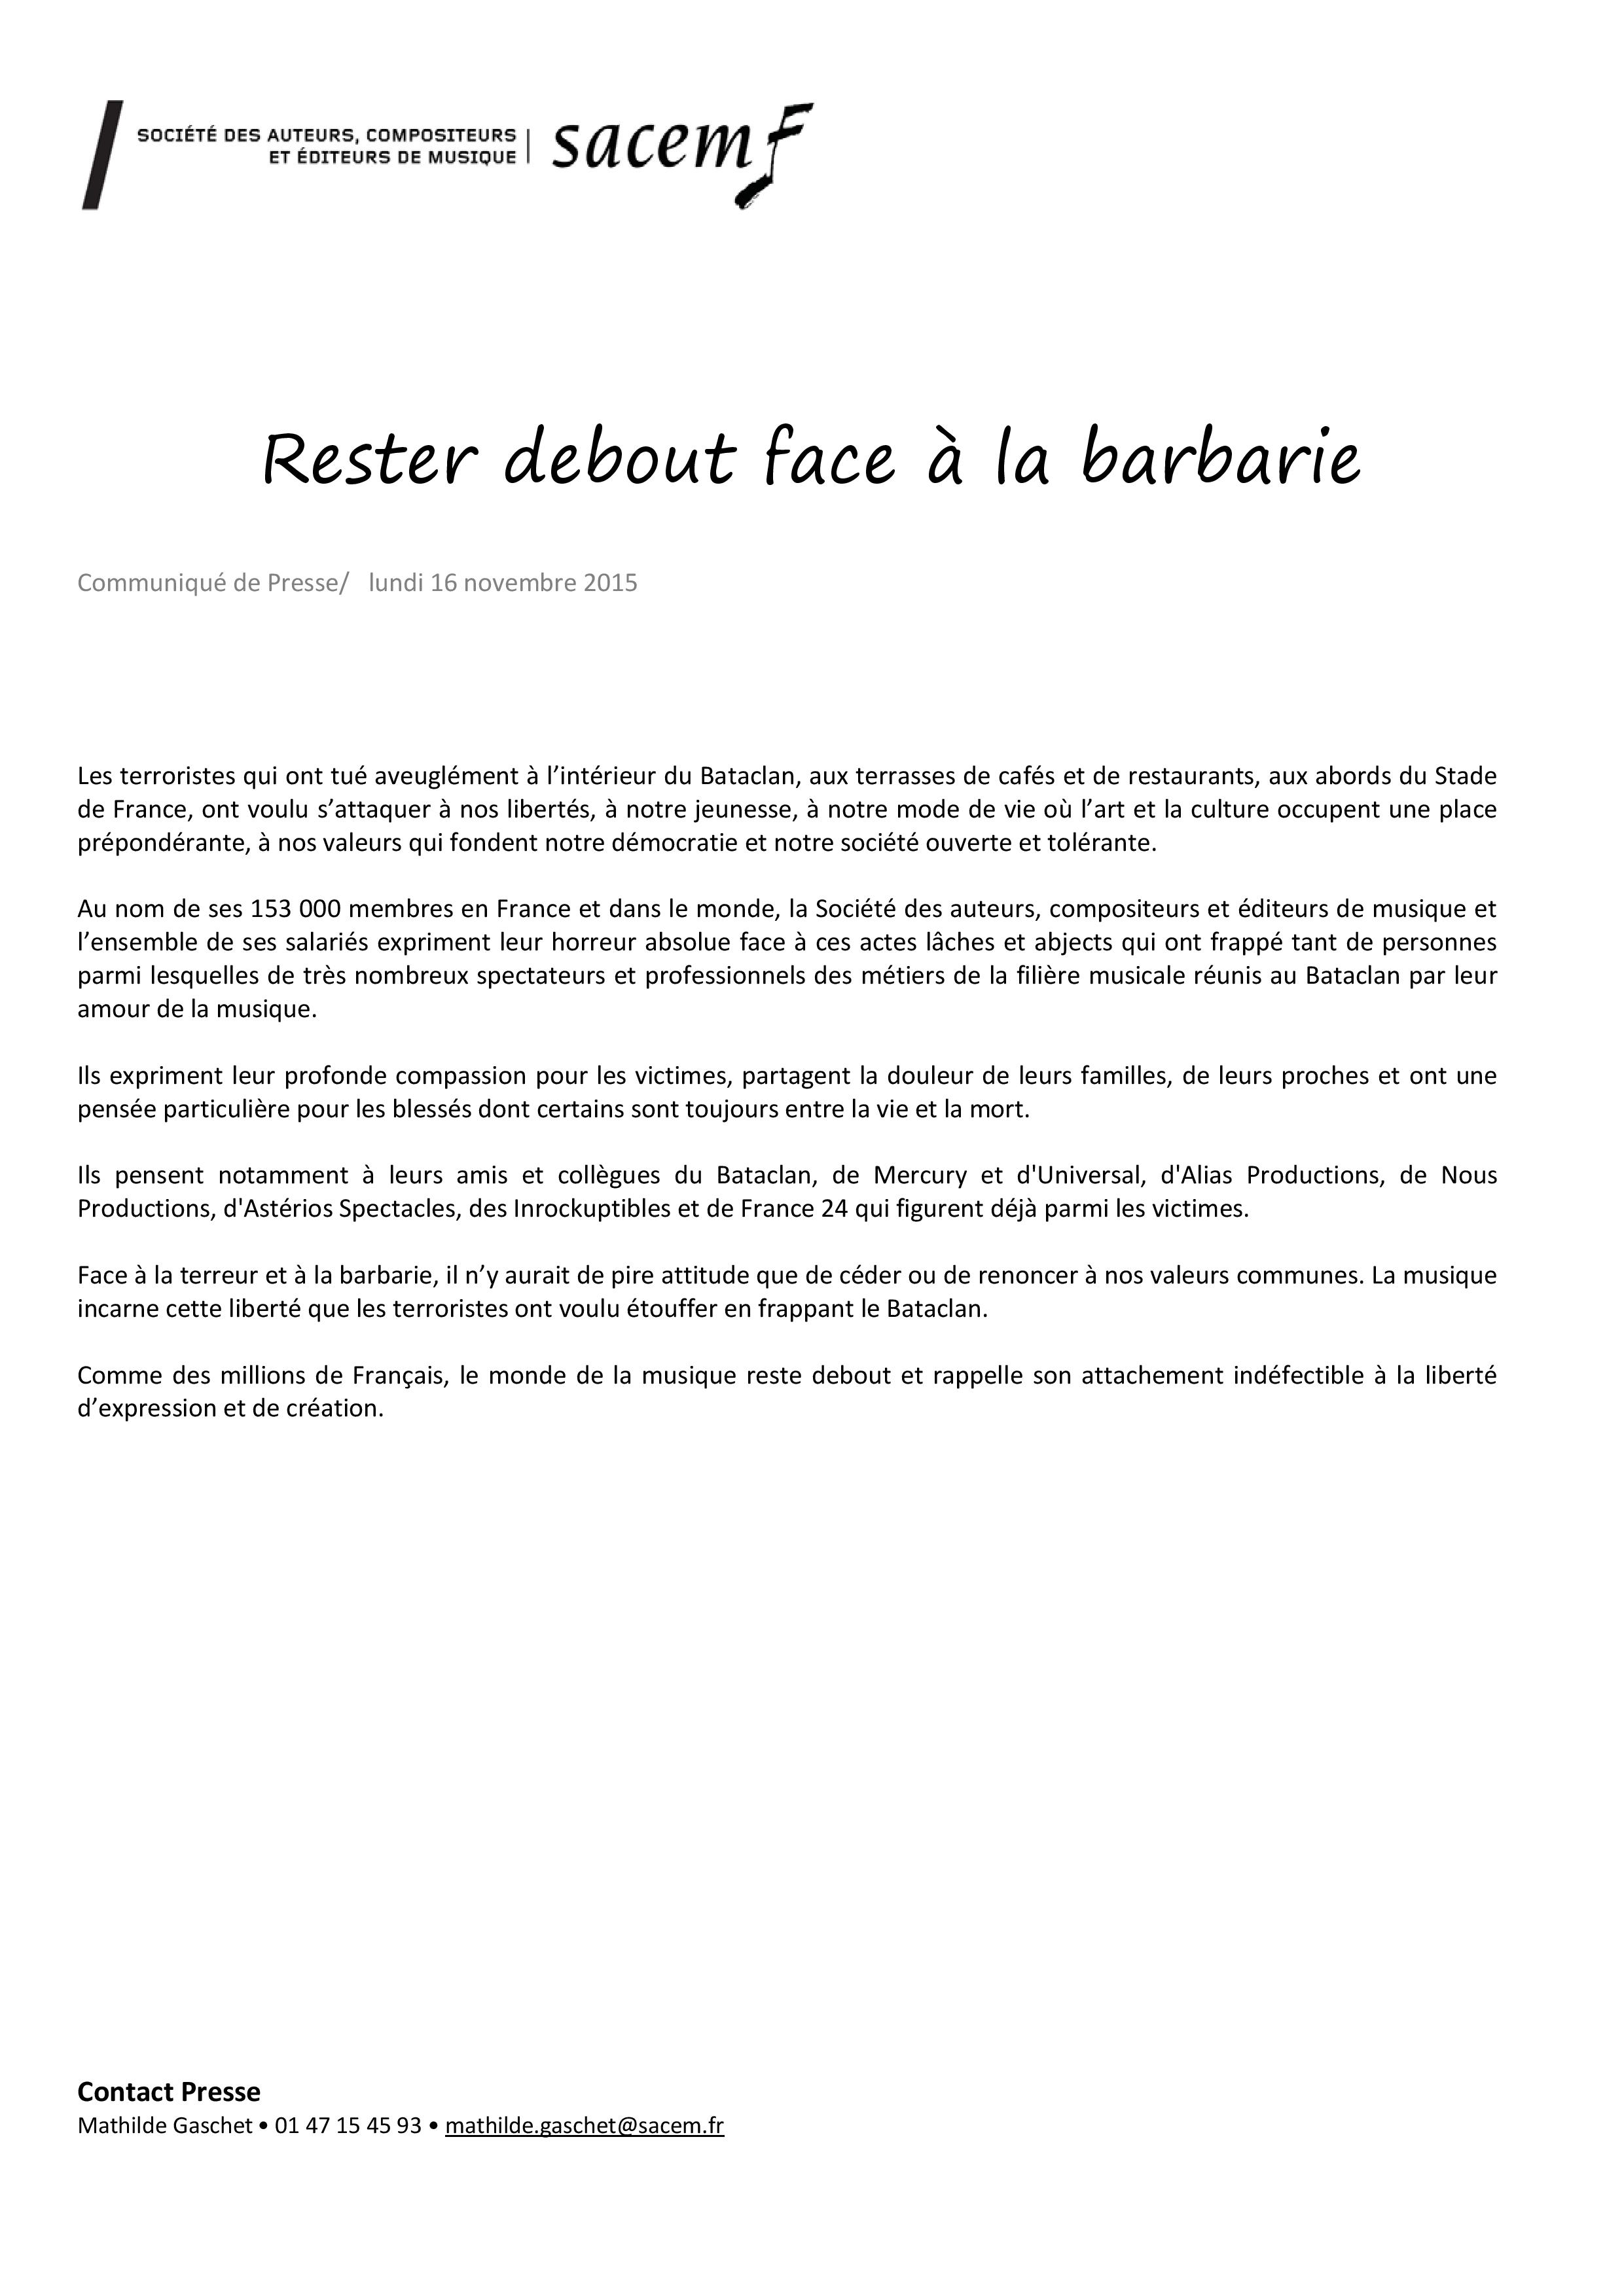 CP Sacem_ 20151116 (1)-page-001